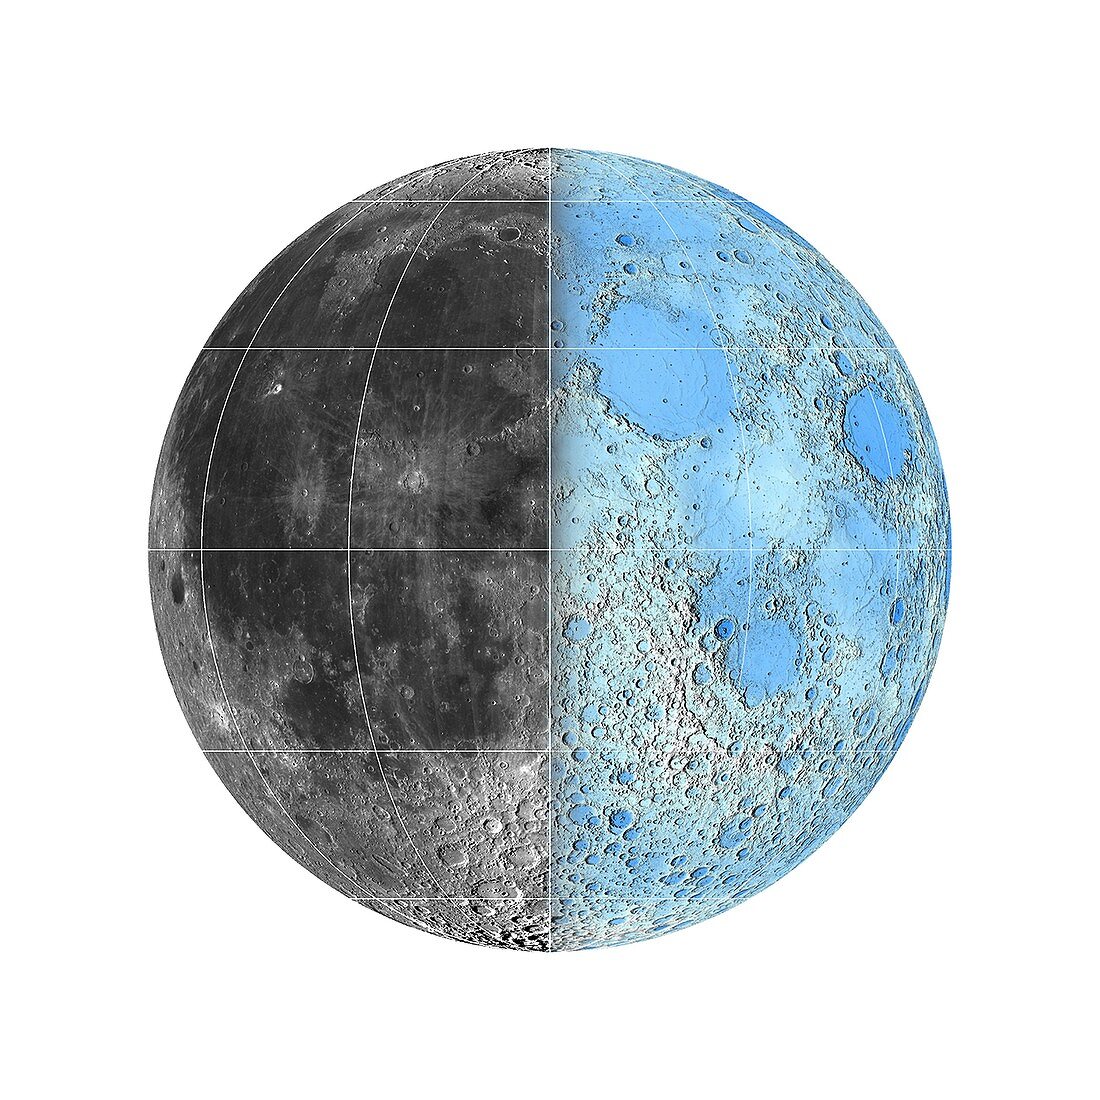 Moon's surface and topography, LRO images